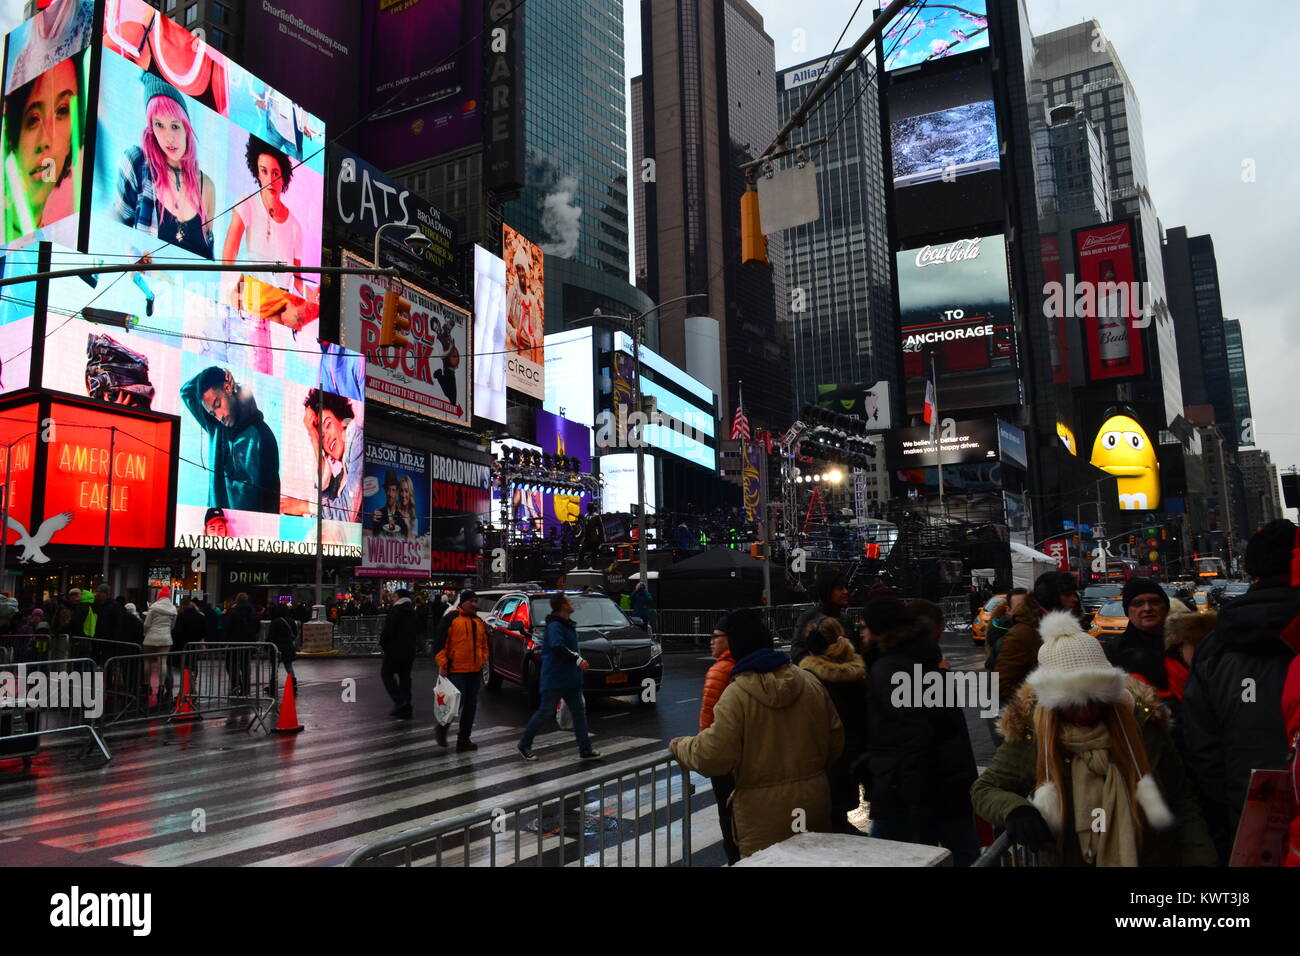 New Year's eve preparations in Times Square, New York Stock Photo